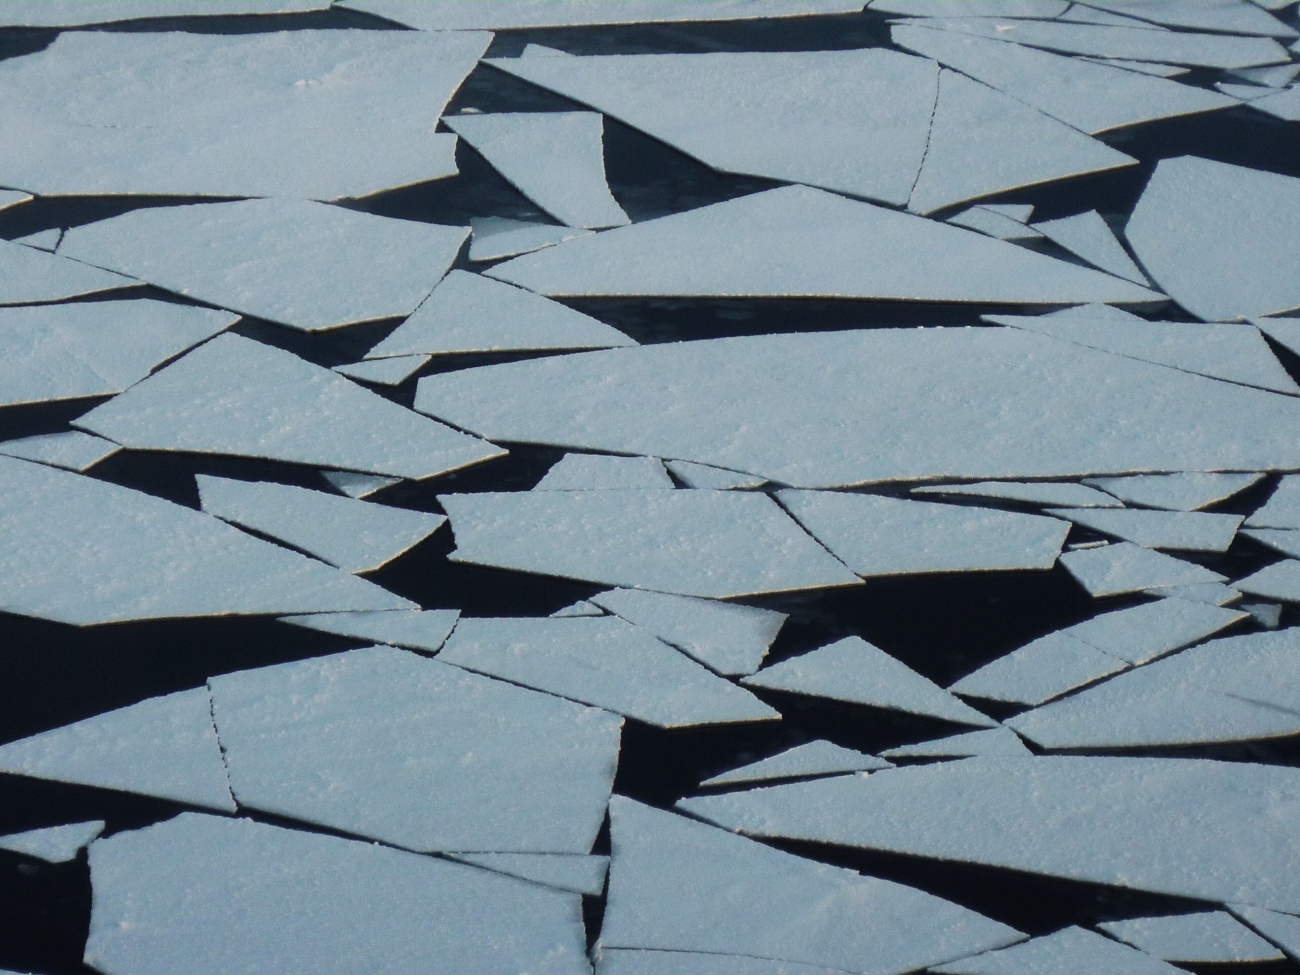 Polygons of new ice form striking geometric patterns